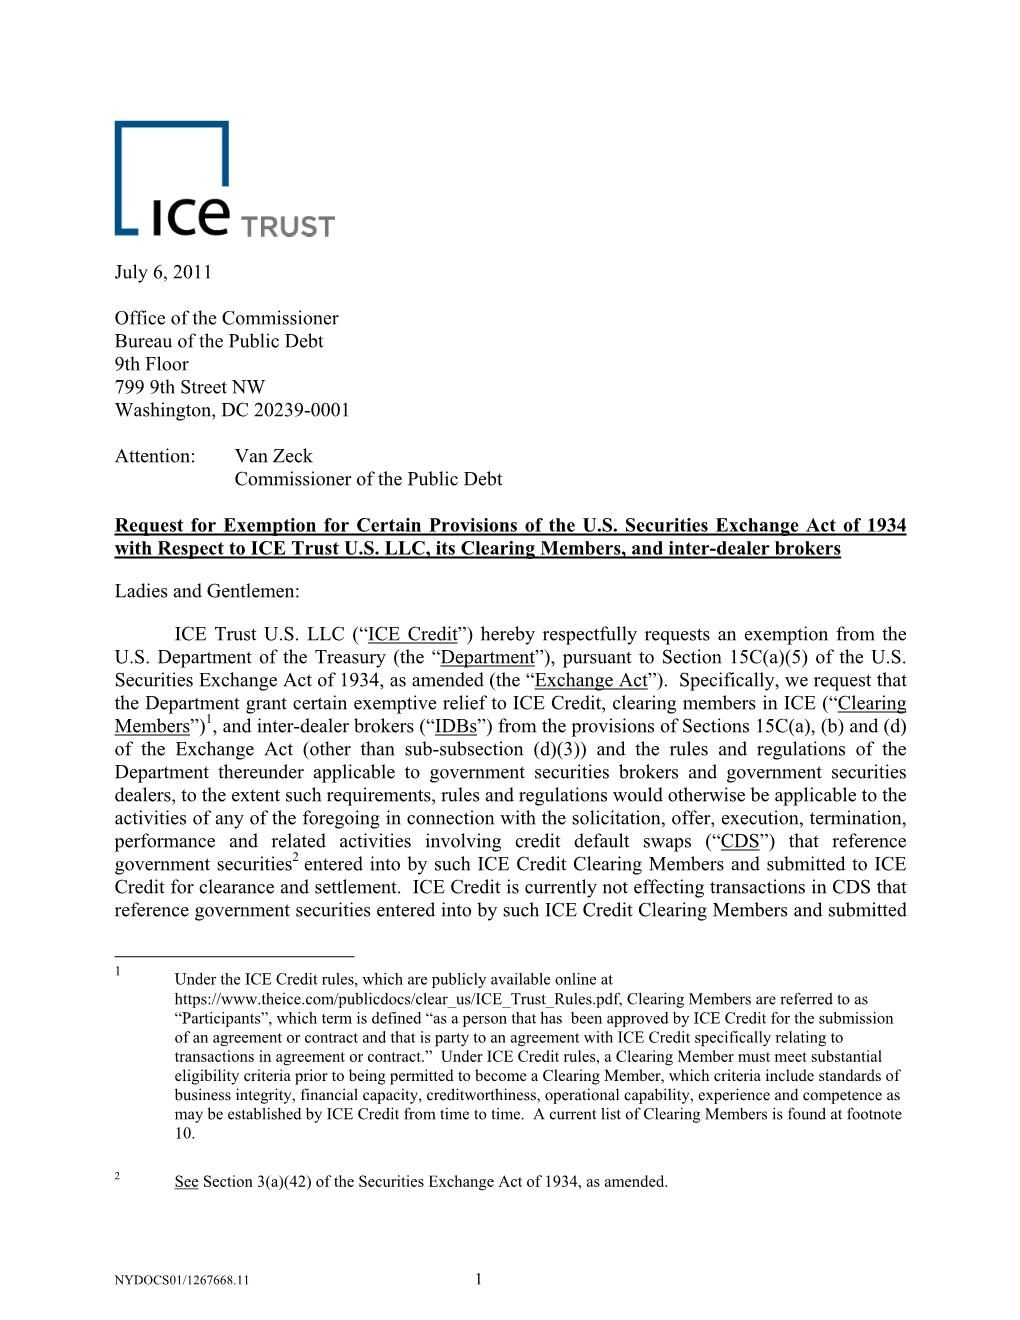 Request from ICE Trust U.S. LLC Related to Central Clearing of Credit Default Swaps, and Request for Comments,” Issued Jan